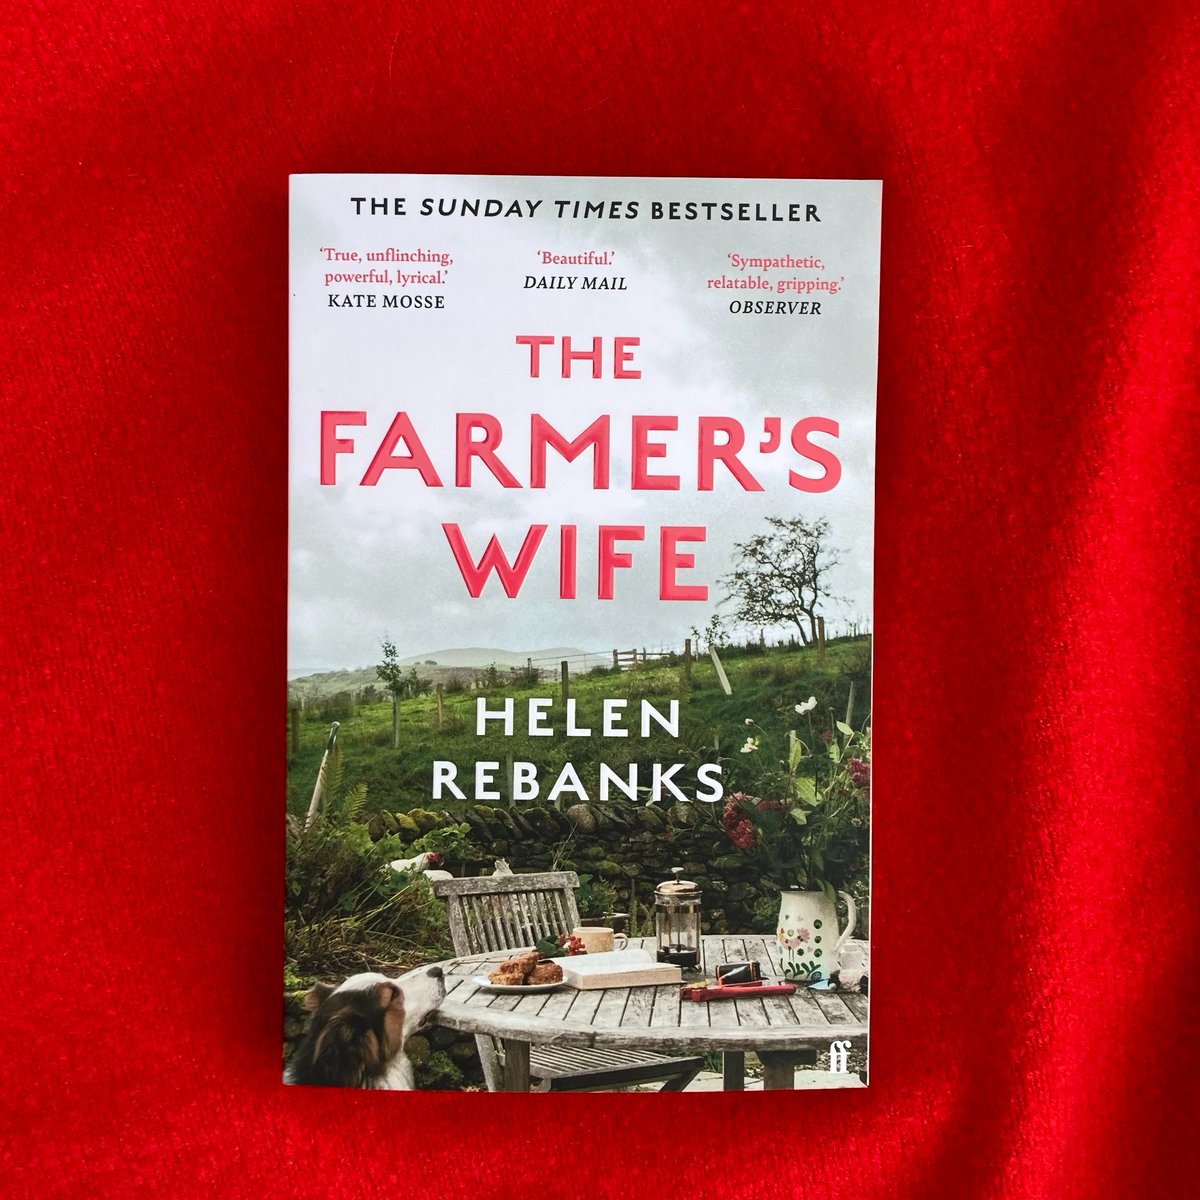 'Show me a great family farm and nine times out of ten I'll show you a brilliant woman somewhere in the mix.' Listen to @theshepherdswi1 on Radio 4's Today programme on the often unseen role of women in farming: bbc.co.uk/sounds/play/m0…